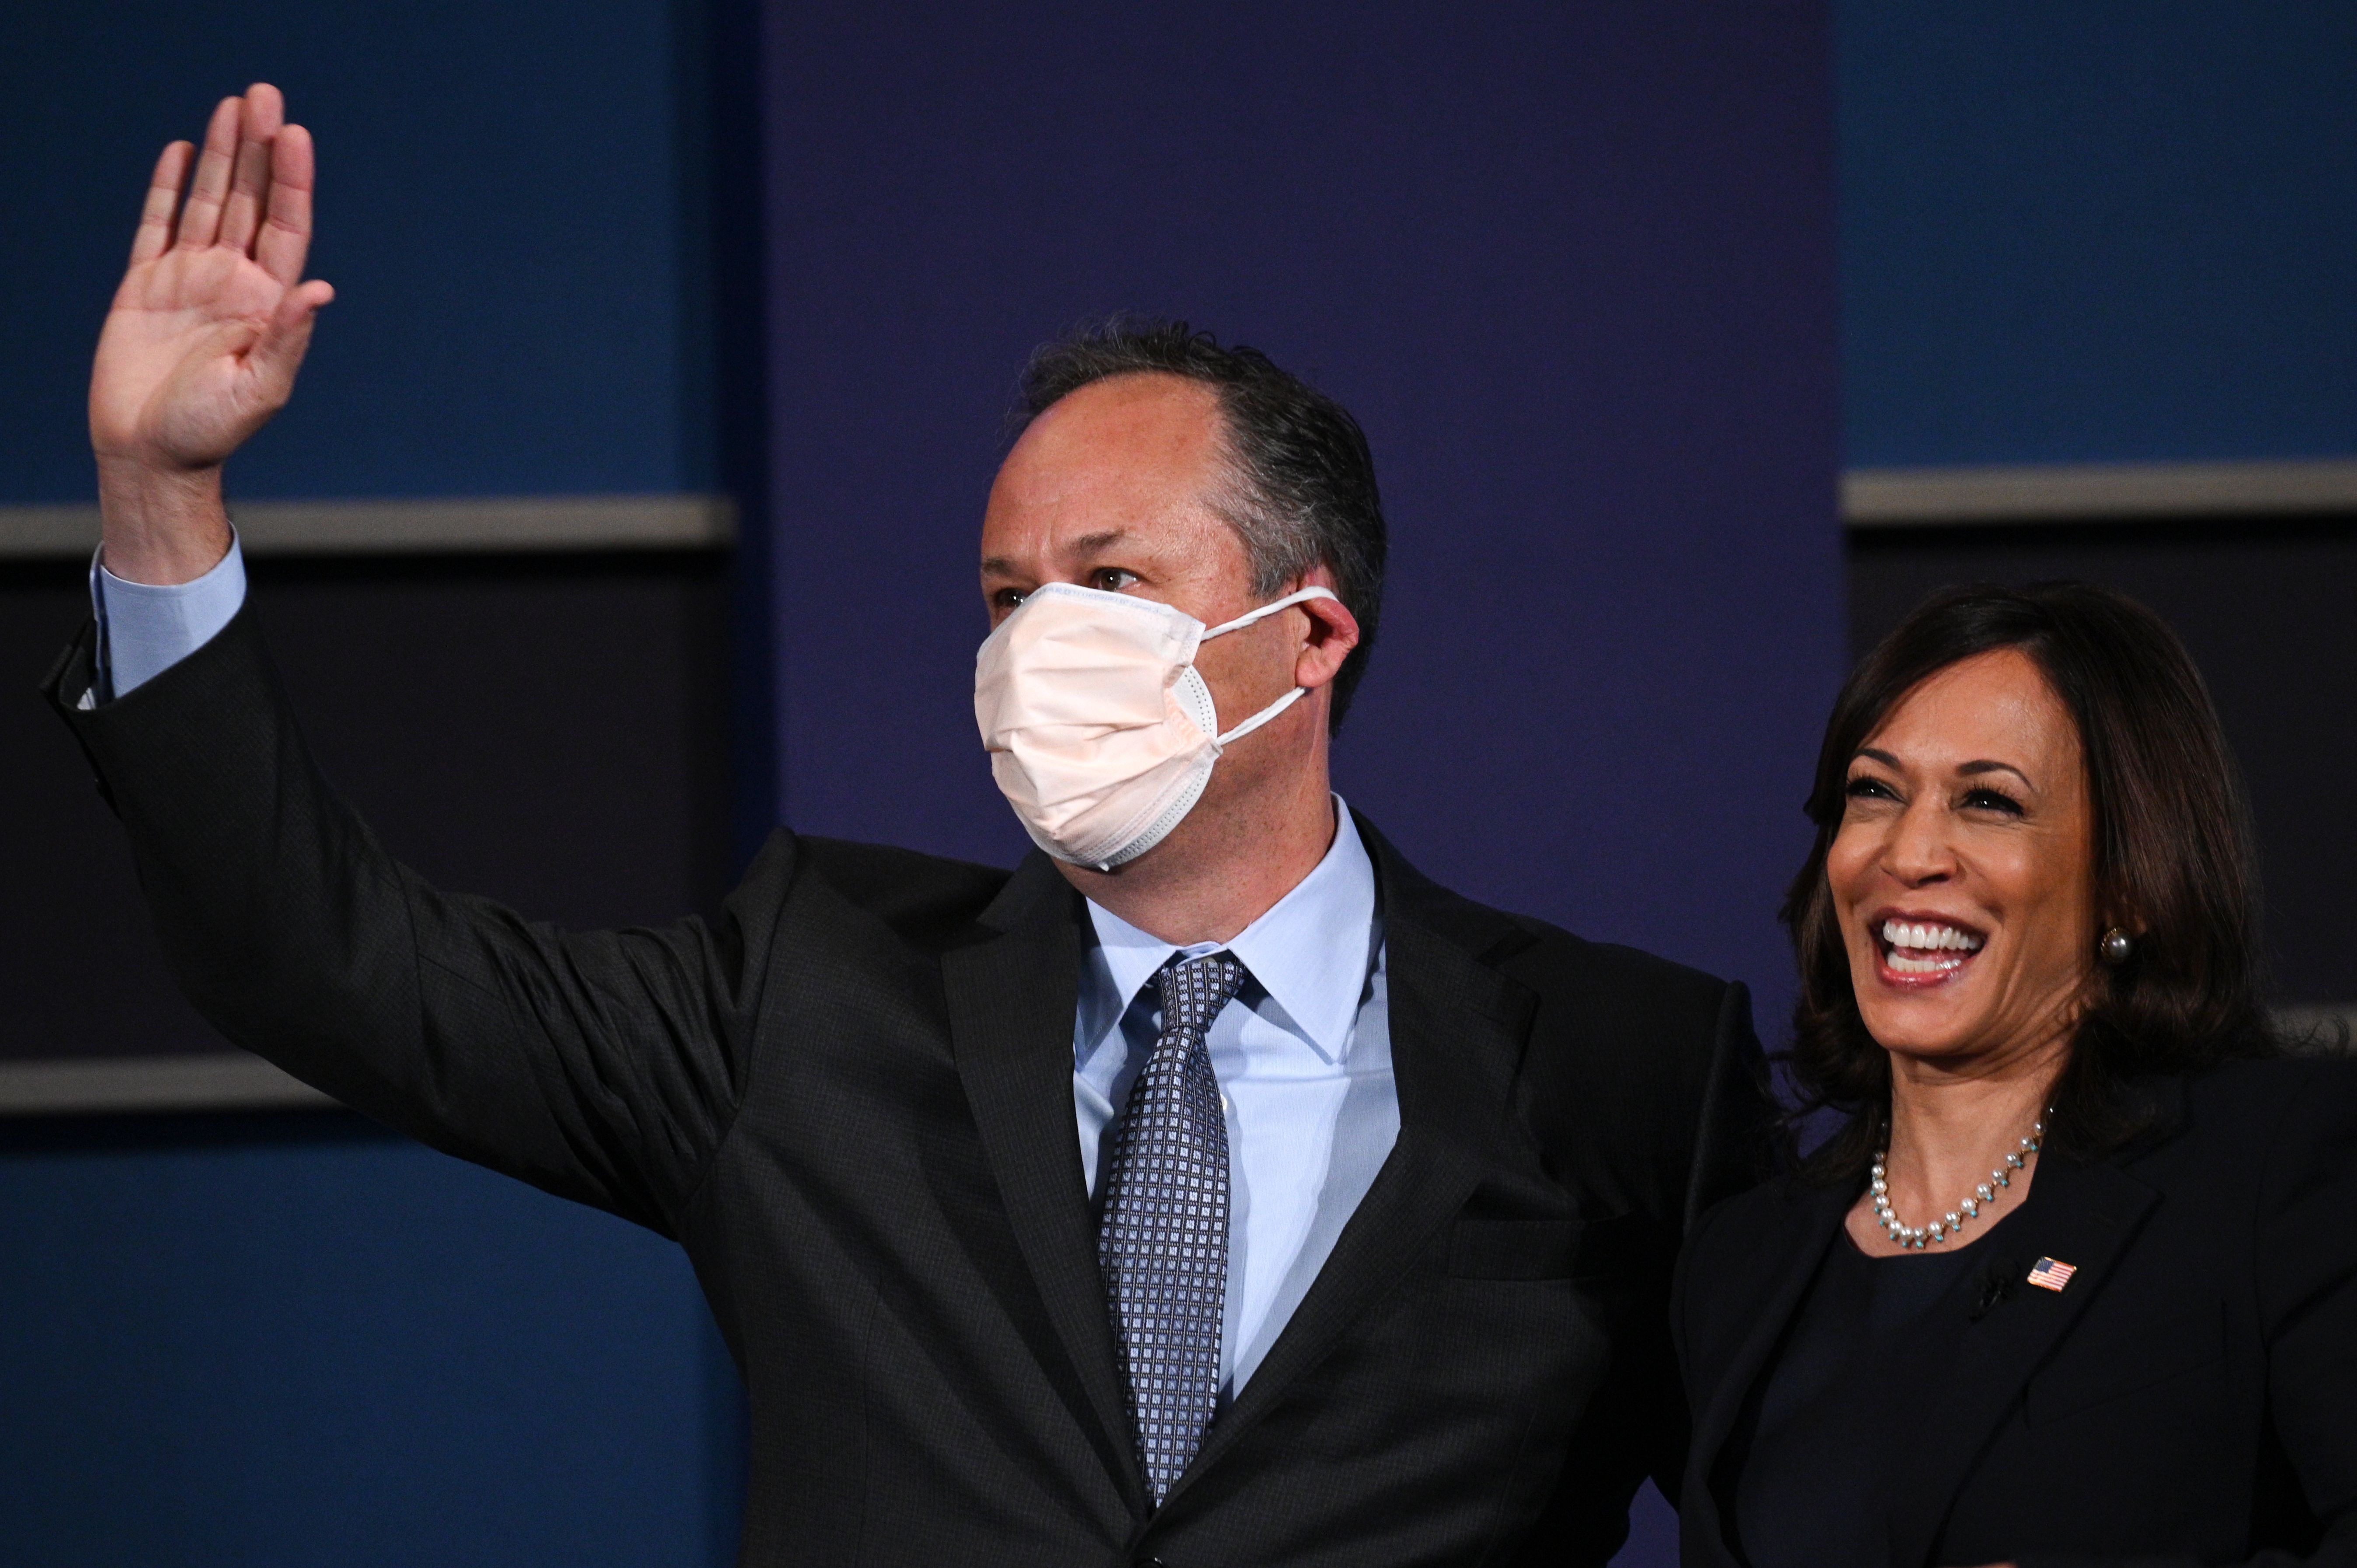 Vice presidential nominee Sen. Kamala Harris and husband Doug Emhoff onstage after the vice presidential debate at the University of Utah on October 7, 2020, in Salt Lake City.